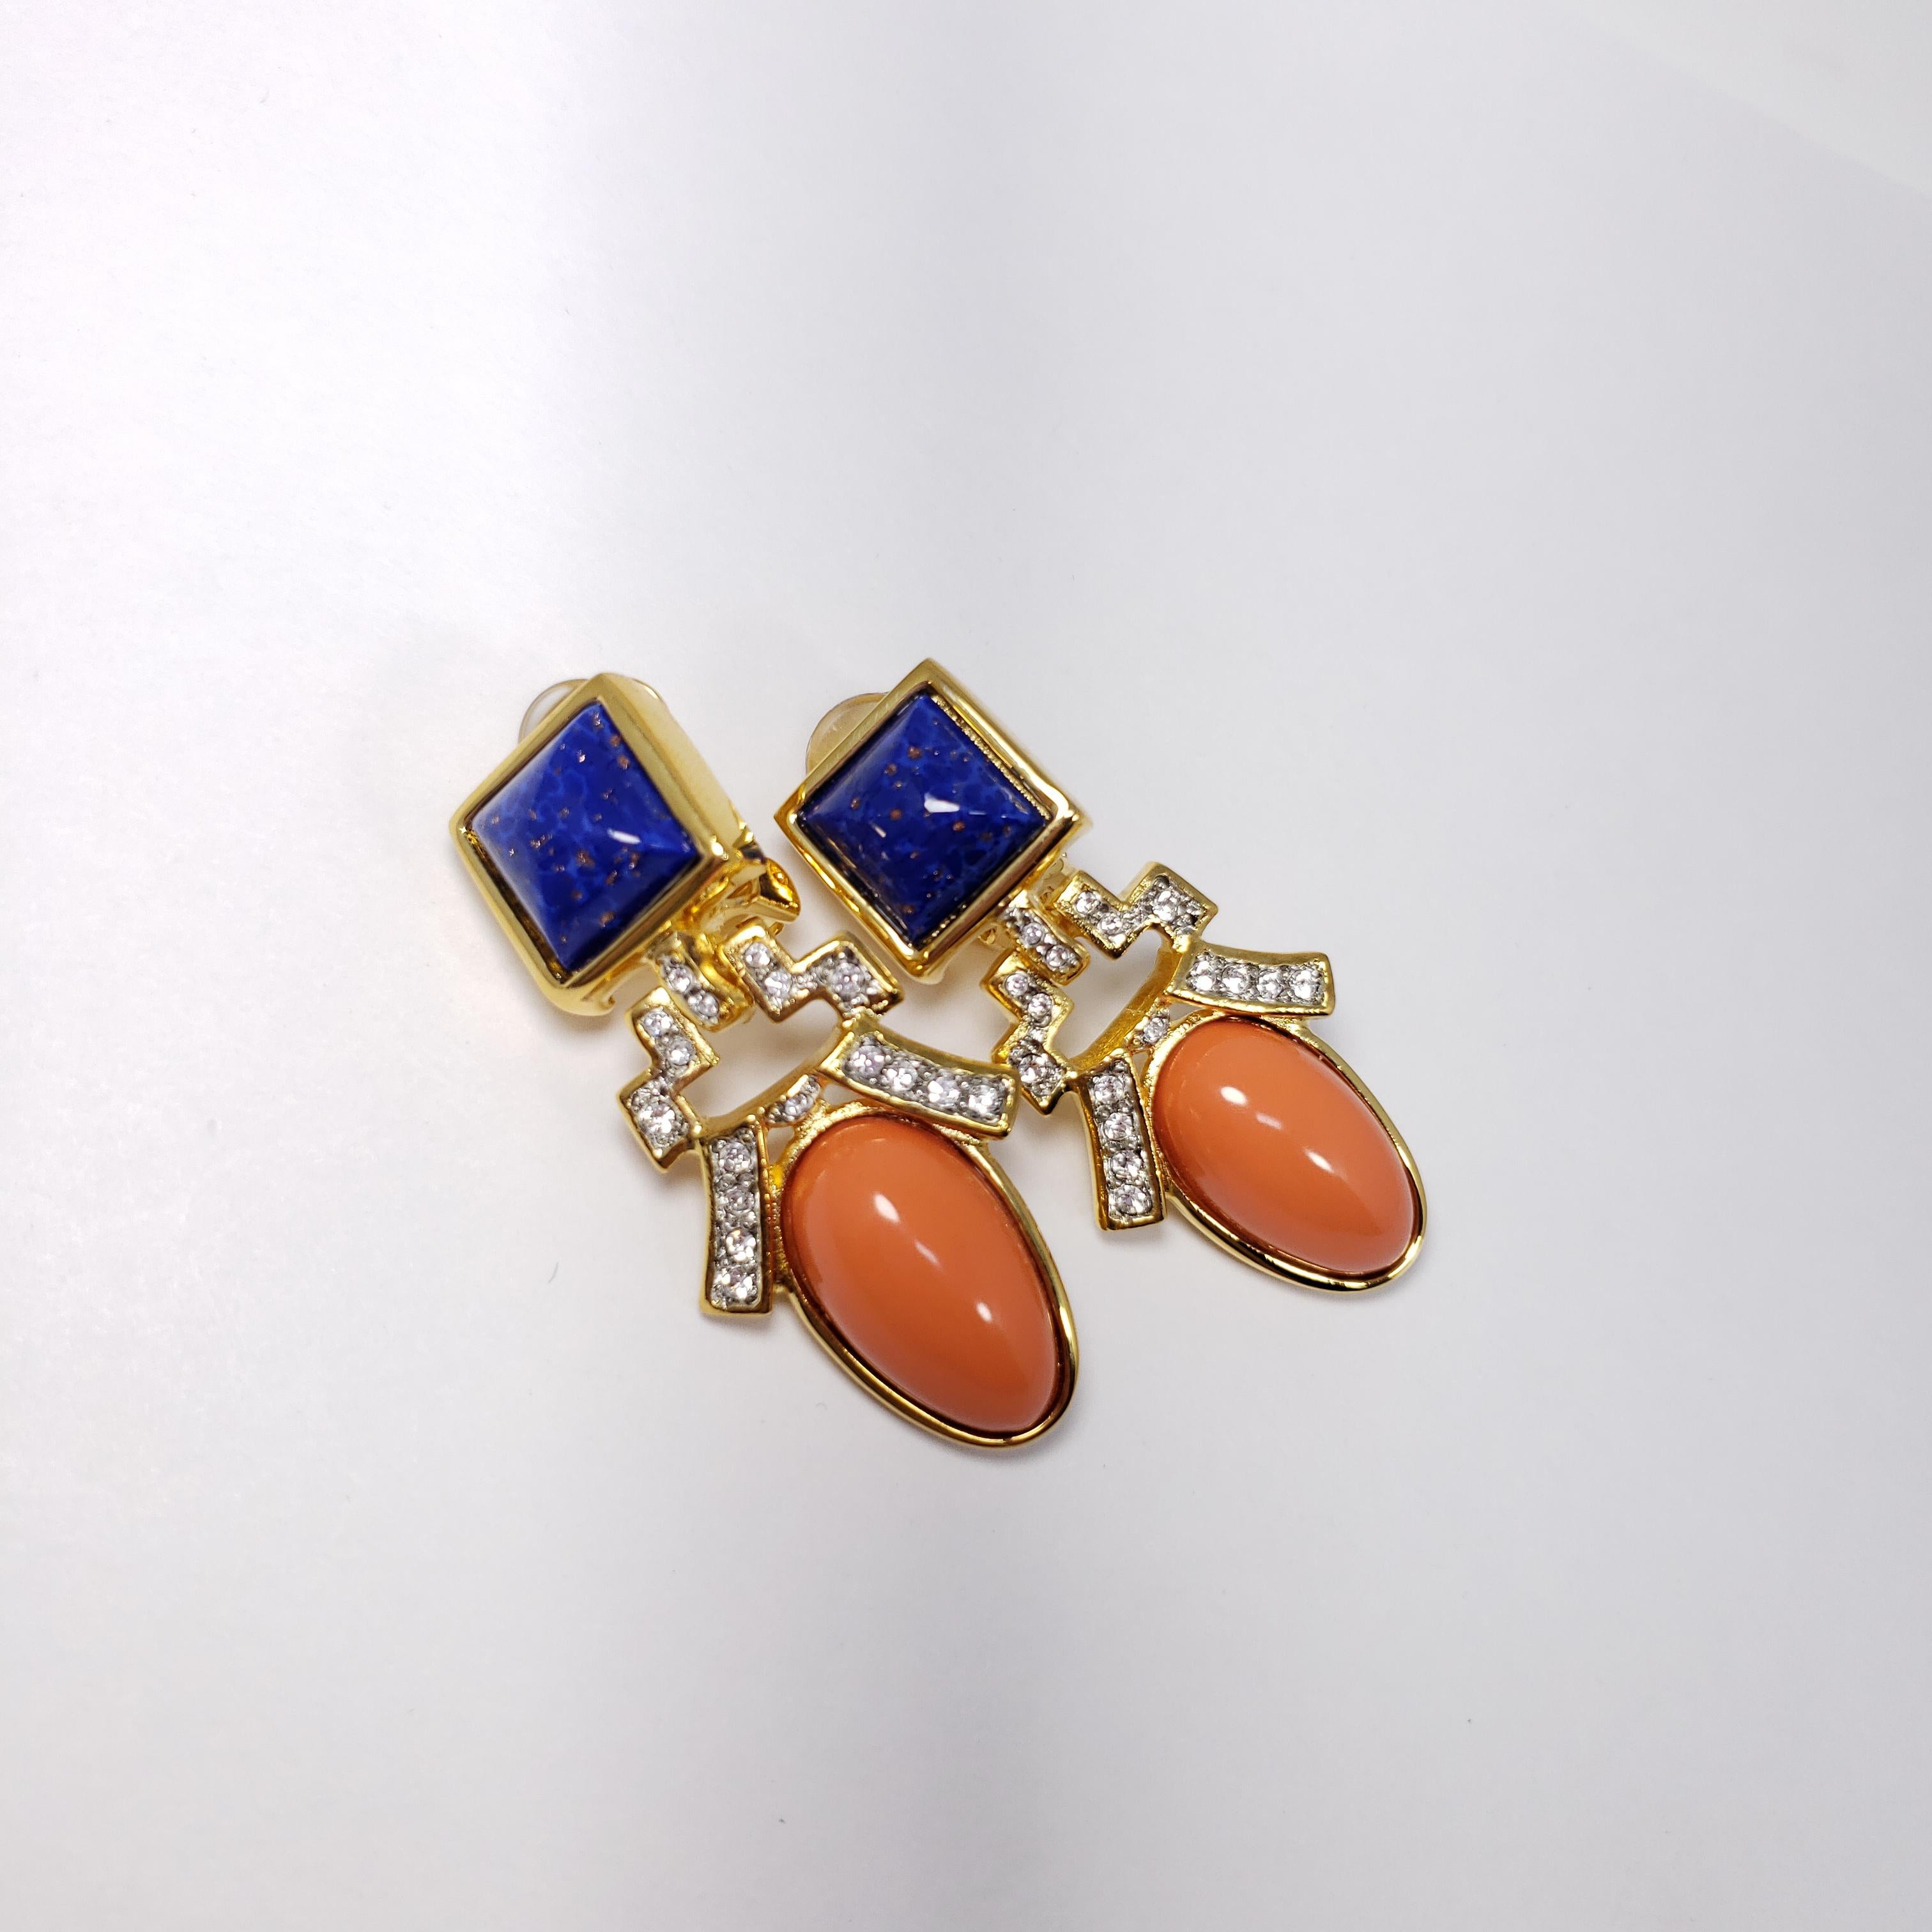 Stylish art deco-style earrings by Kenneth Jay Lane. Each earring features a faux lapis lazuli and coral cabochon, accented with crystals. All set in gold-plated metal.

Hallmarks: KJL, Made in USA